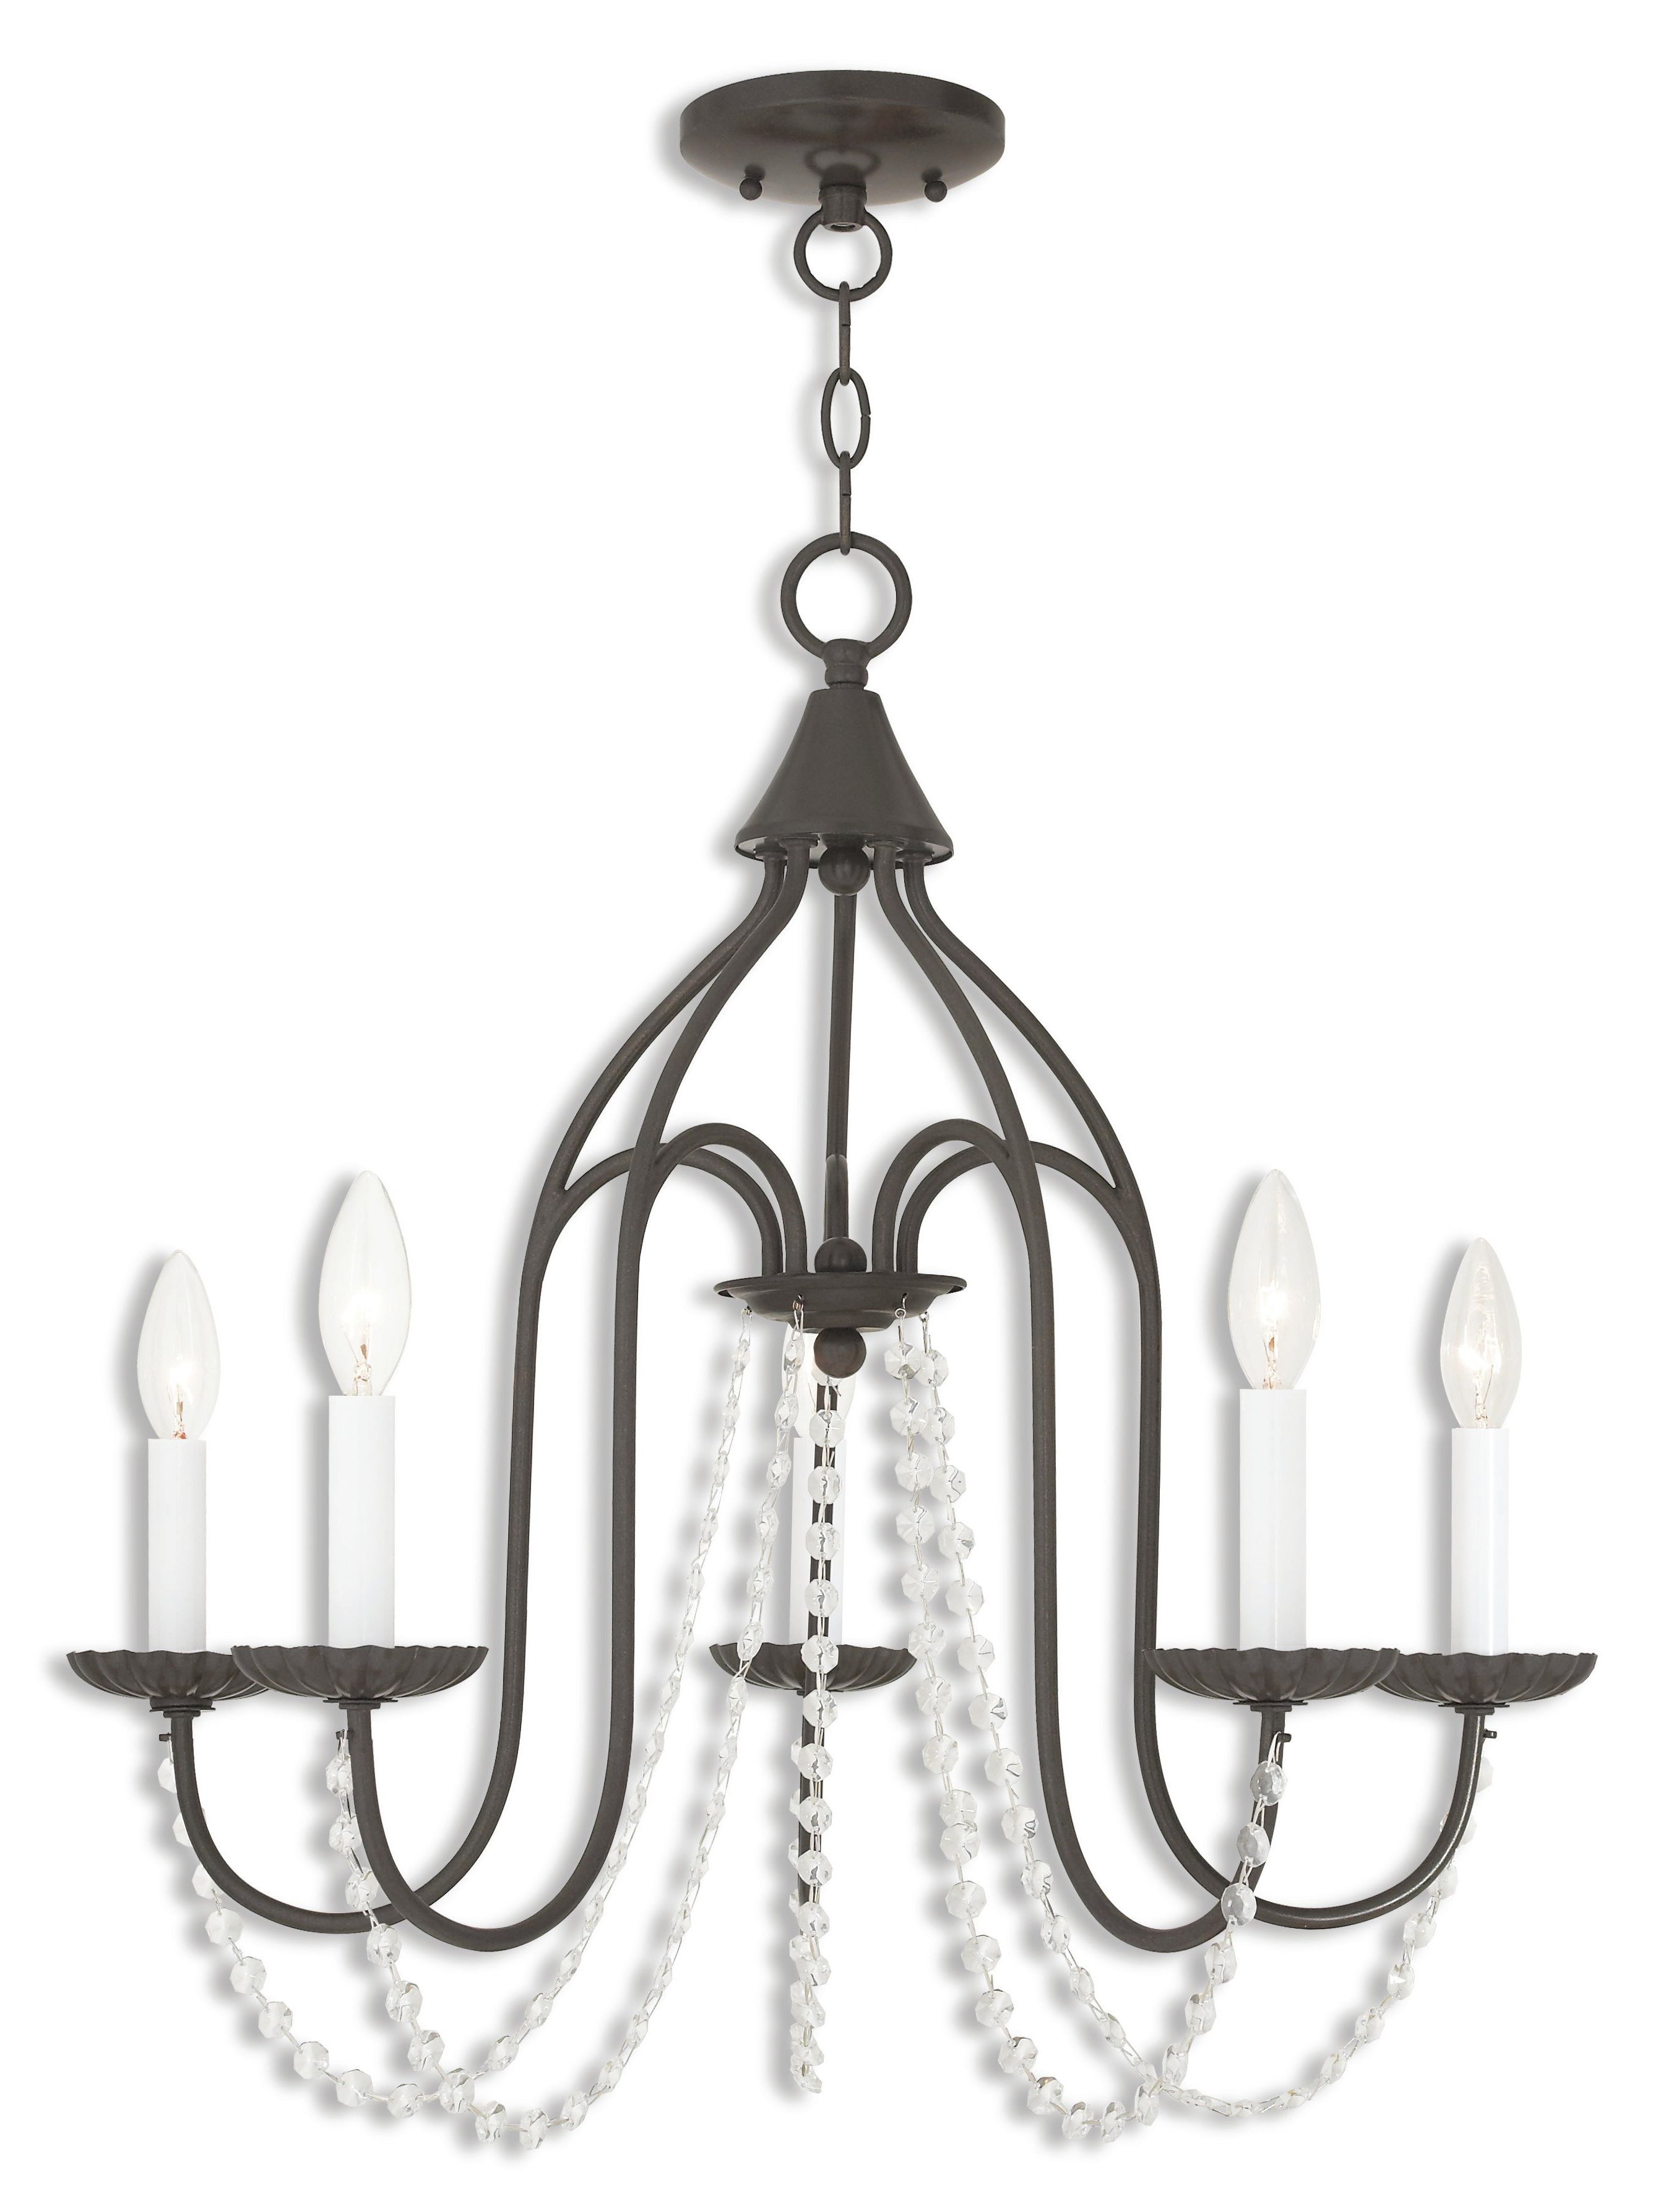 Best And Newest Florentina 5 Light Candle Style Chandeliers For Florentina 5 Light Candle Style Chandelier (View 3 of 25)